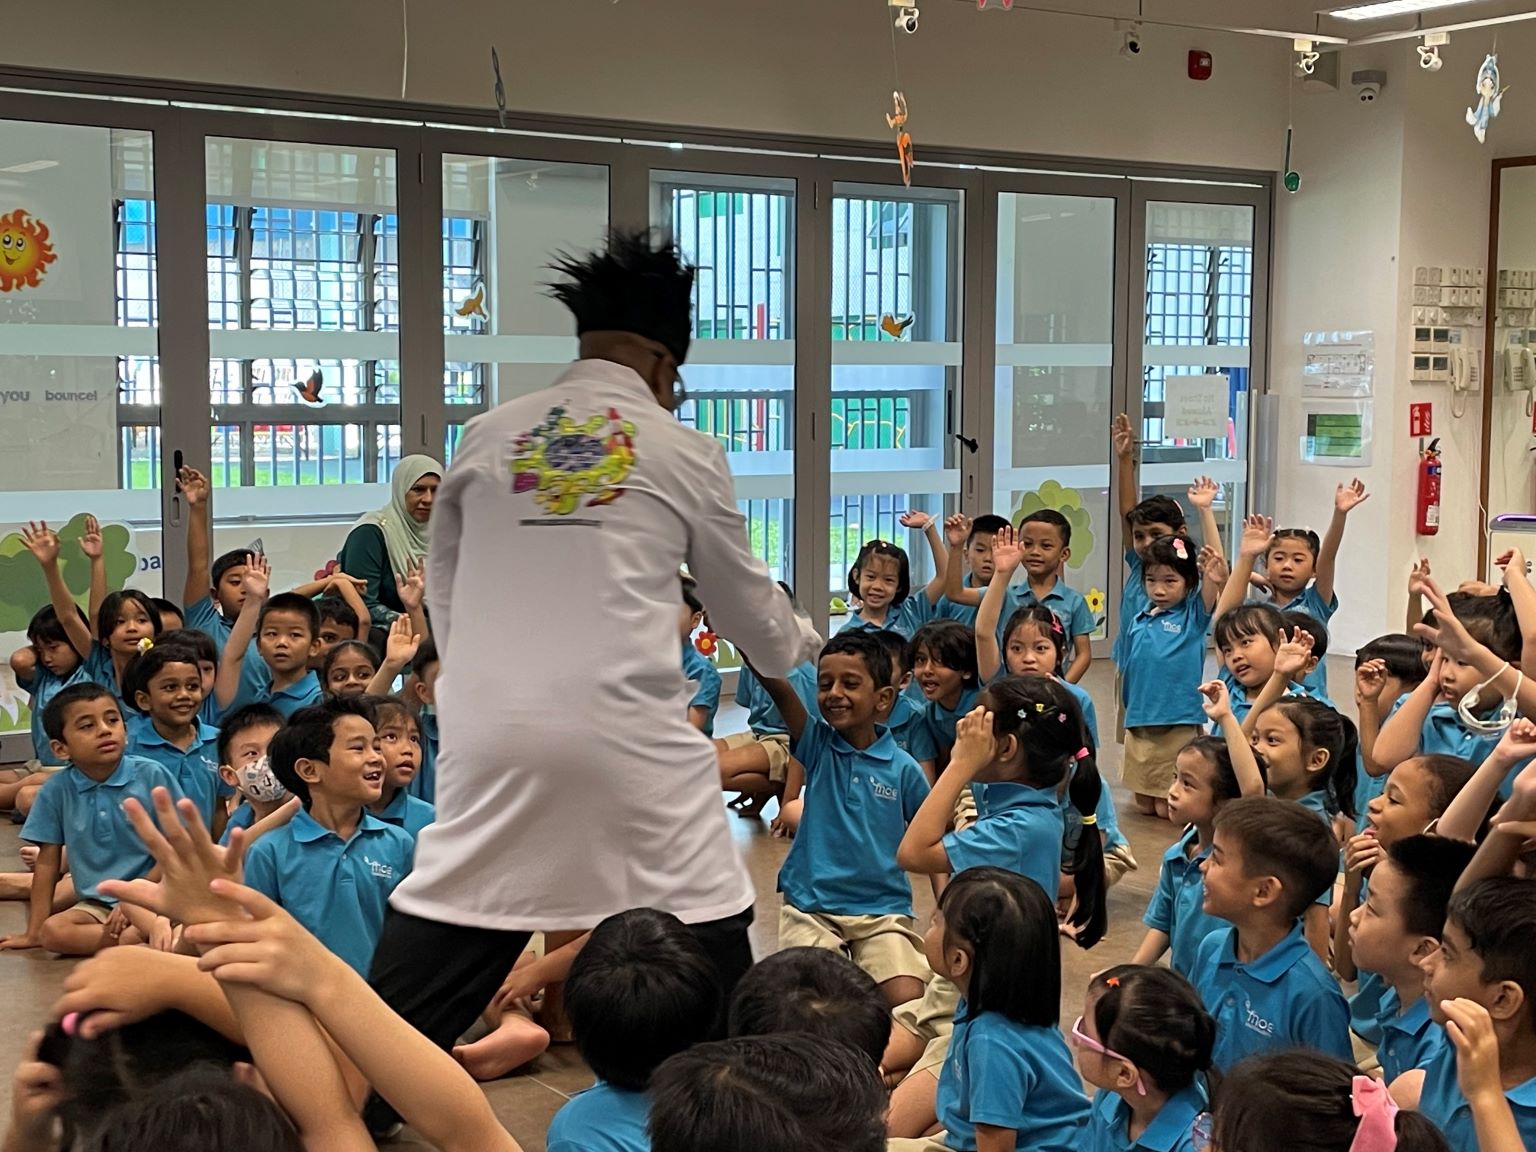 MK@AG invited Mad Science on the last day of school term for a fun-filled session.